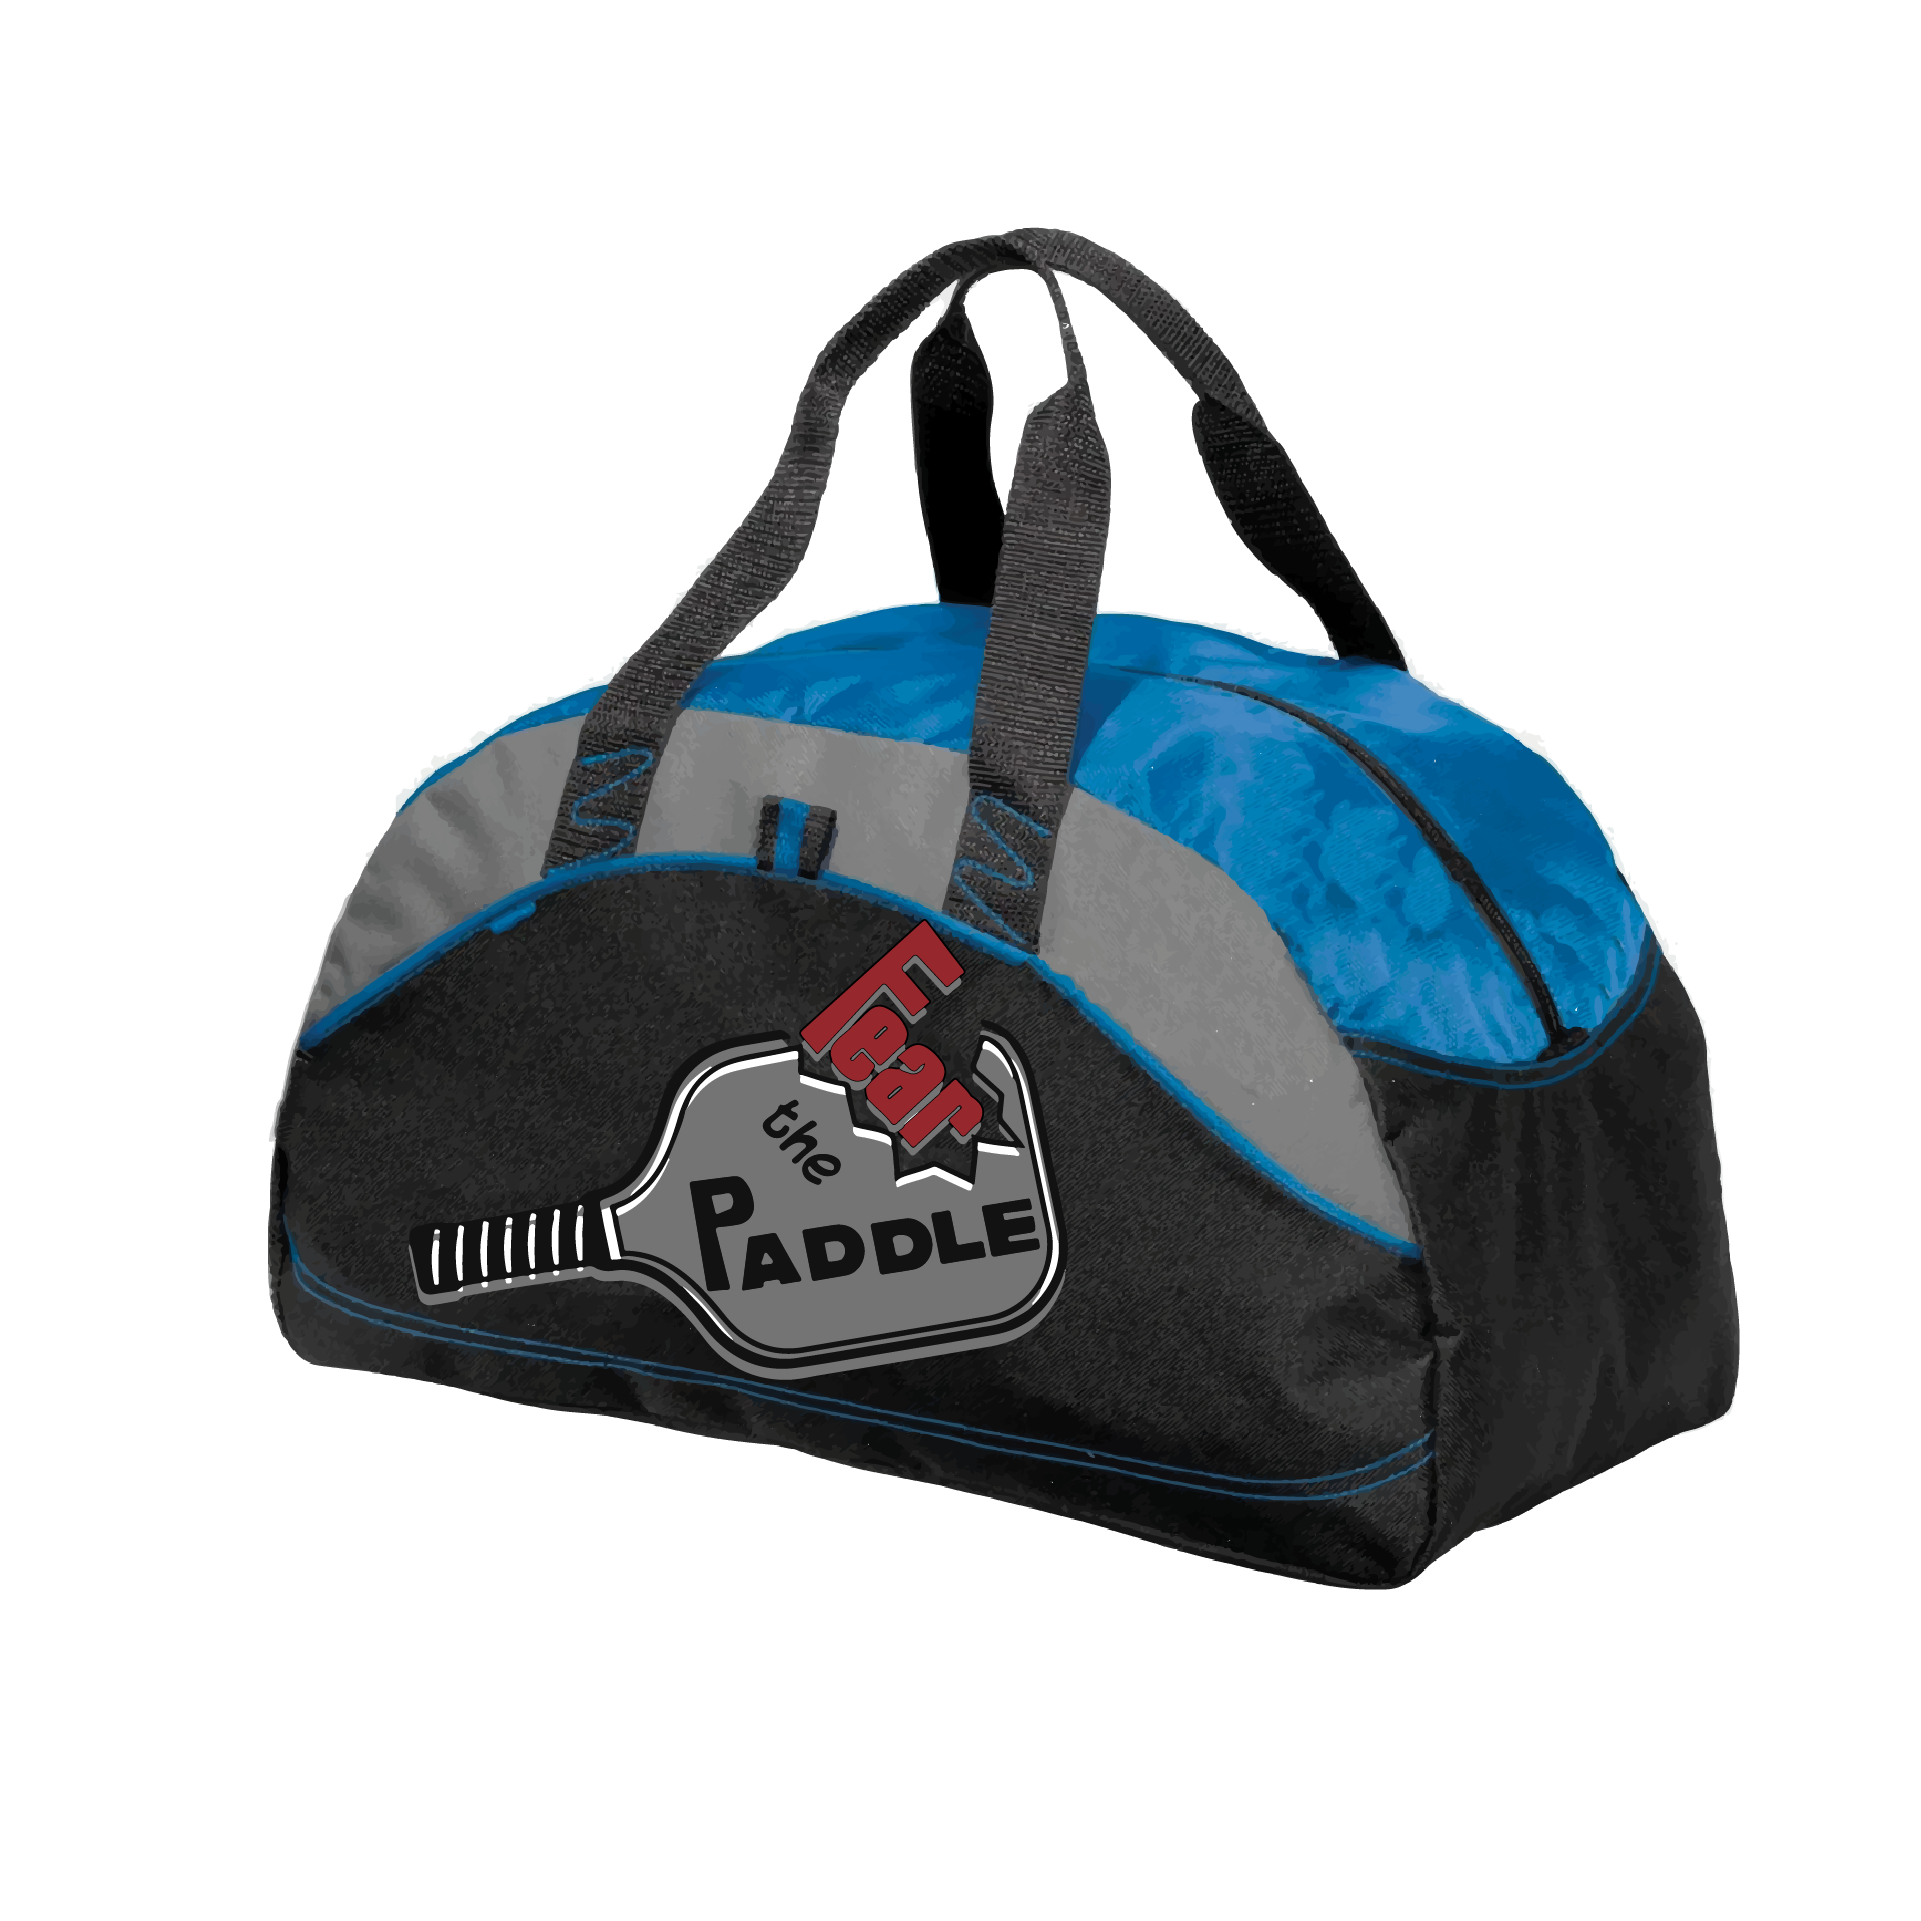 Pickleball Design: Fear the Paddle  Carry your gear in comfort and style. This fun pickleball duffel bag is the perfect accessory for all pickleball players needing to keep their gear in one place. This medium sized duffel tote is ideal for all your pickleball activities. The large center compartment allows for plenty of space and the mesh end pocket is perfect for holding a water bottle. Duffel bag comes with an adjustable shoulder strap and the polyester material is durable and easily cleaned.